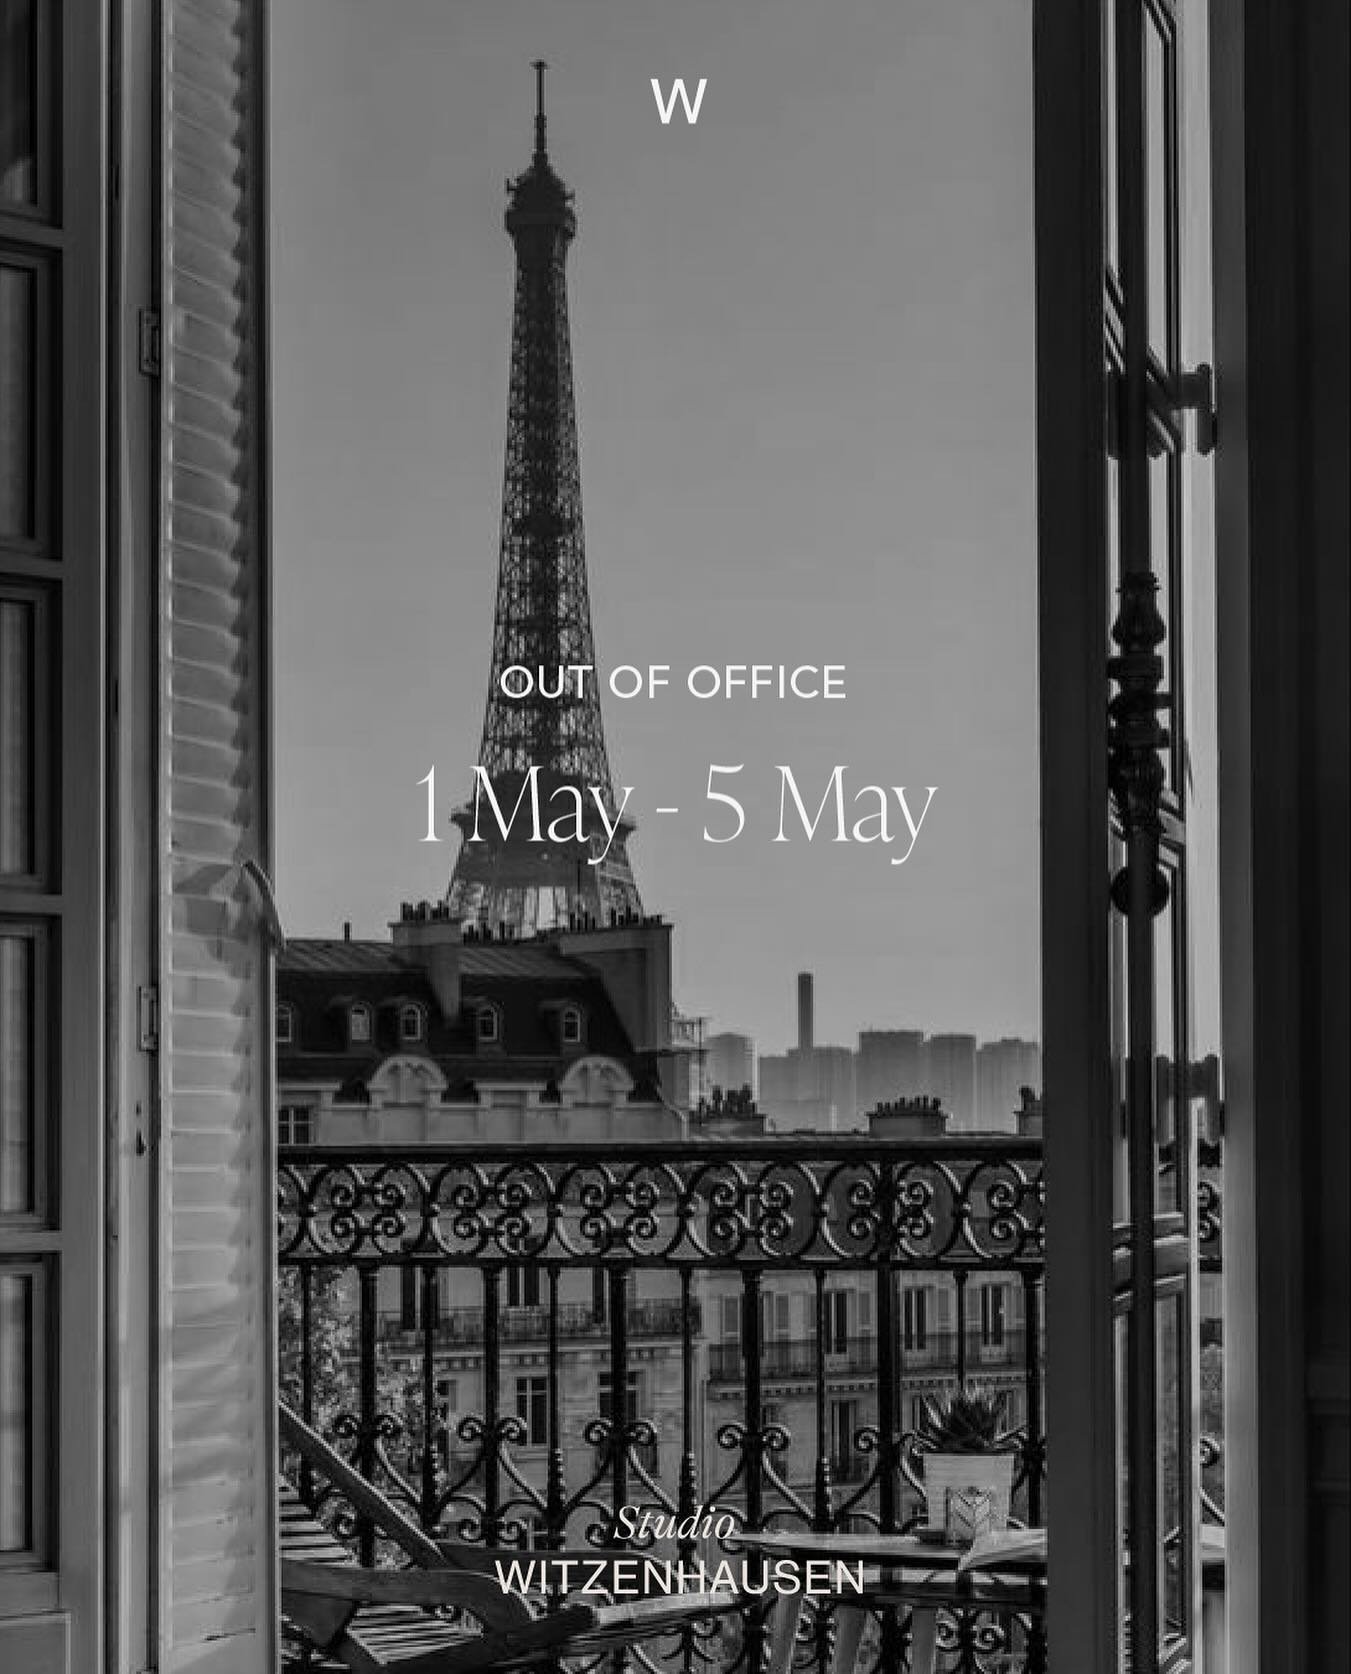 Just a quick note to let you know that I&rsquo;ll be out of the office from May 1st to May 5th, soaking up the sights and sounds of Paris with my family. During this time, I won&rsquo;t be working on client projects, but I&rsquo;ll still be reachable